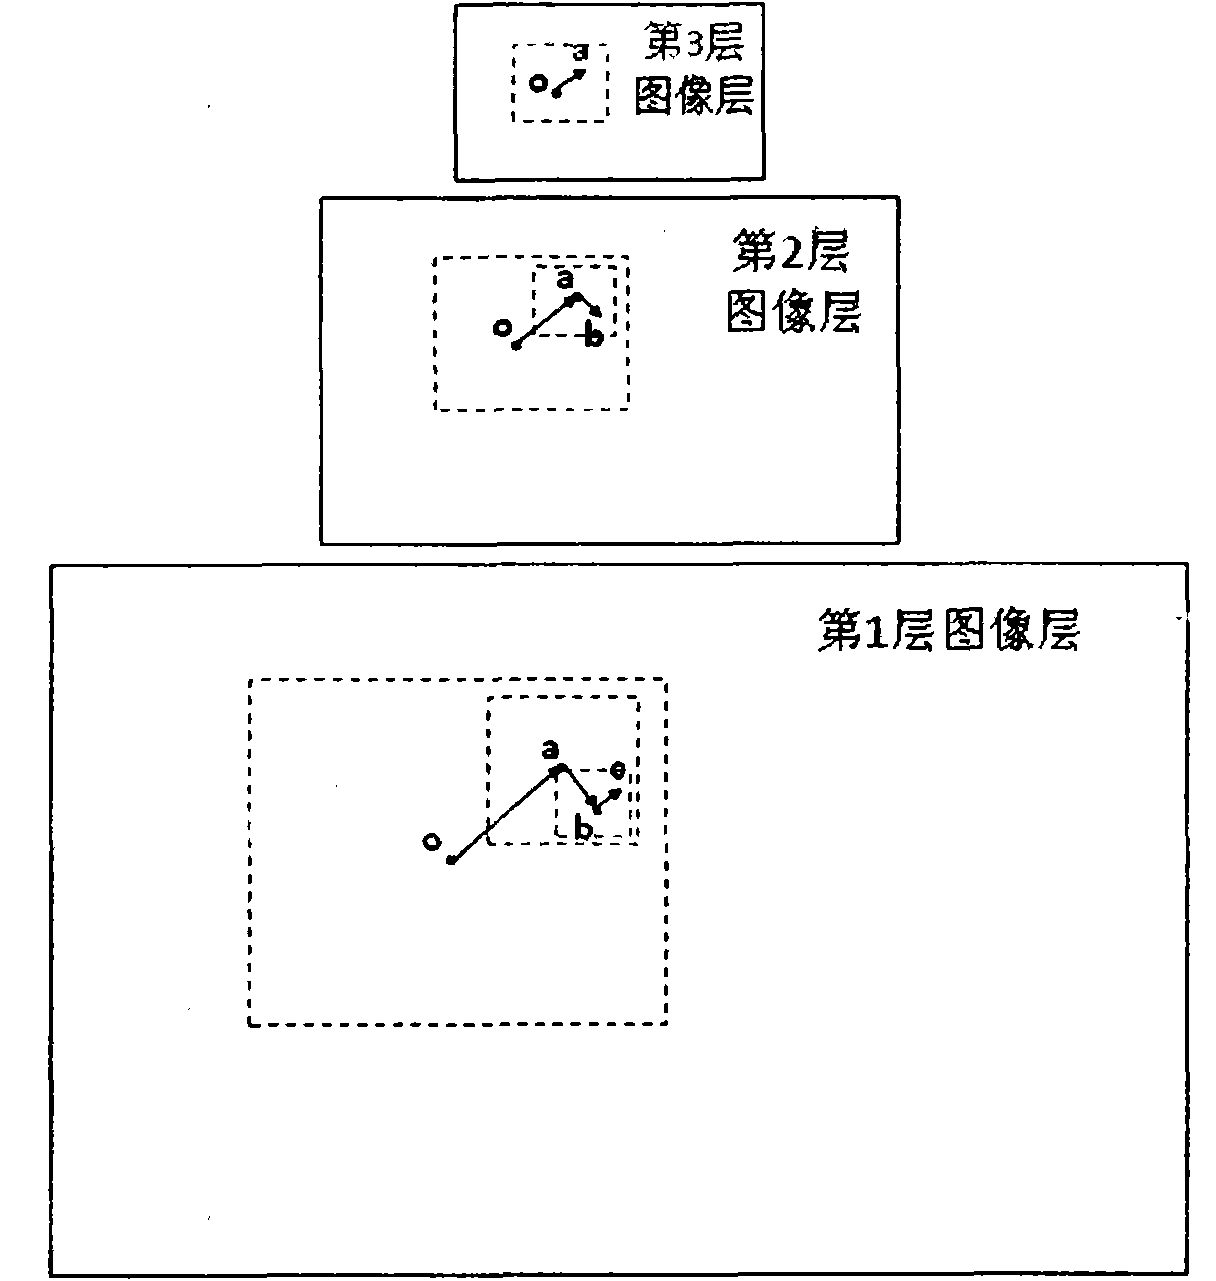 GPU (Graphics Processing Unit) acceleration method used for hierarchical searching motion estimation